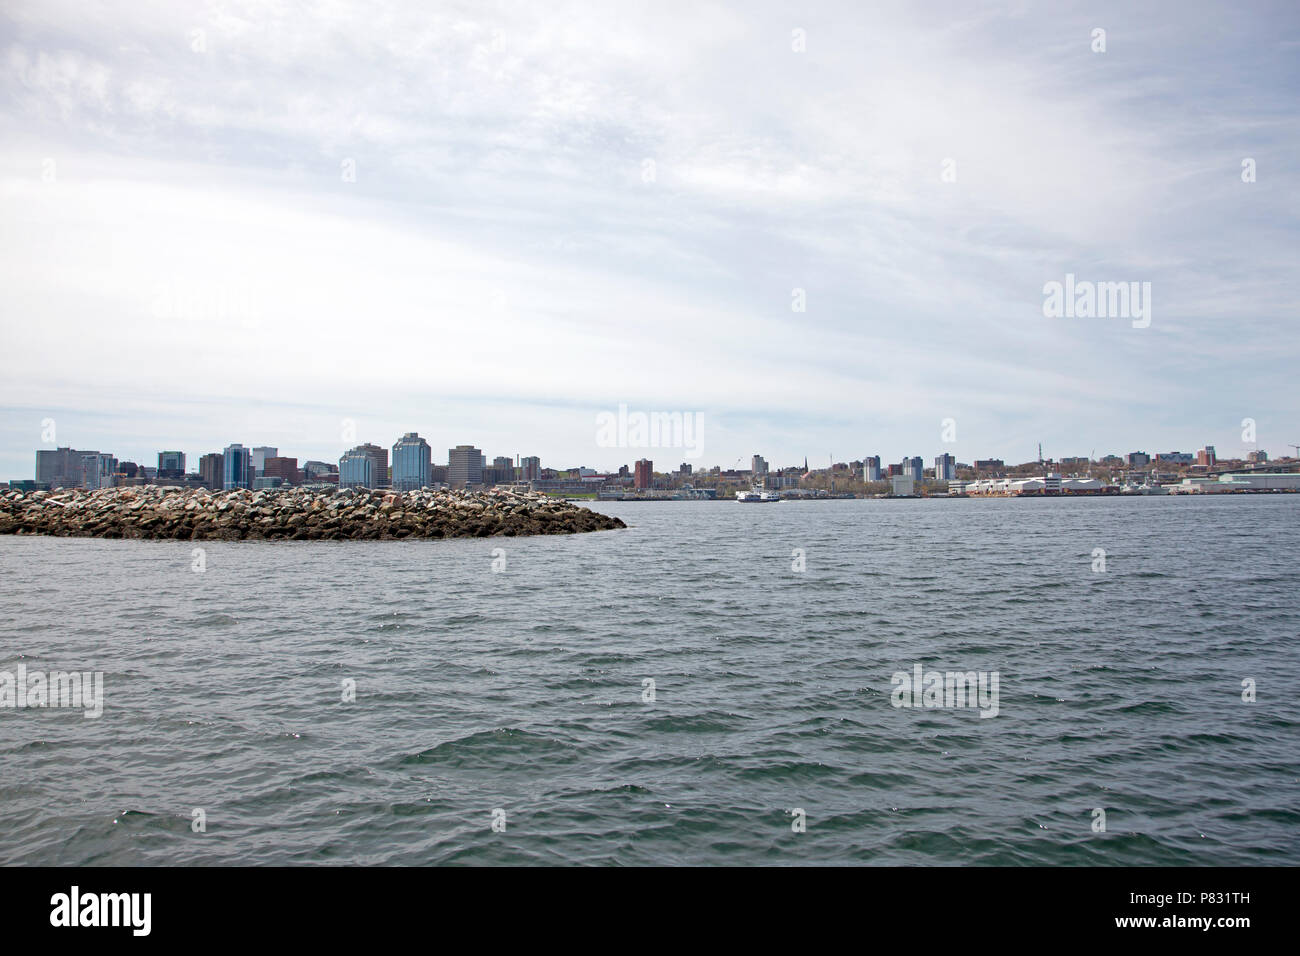 May 12, 2018 - Dartmouth, Nova Scotia: Over the Halifax Harbor from the Dartmouth side, Purdy's Wharf and naval shipyard viewable Stock Photo